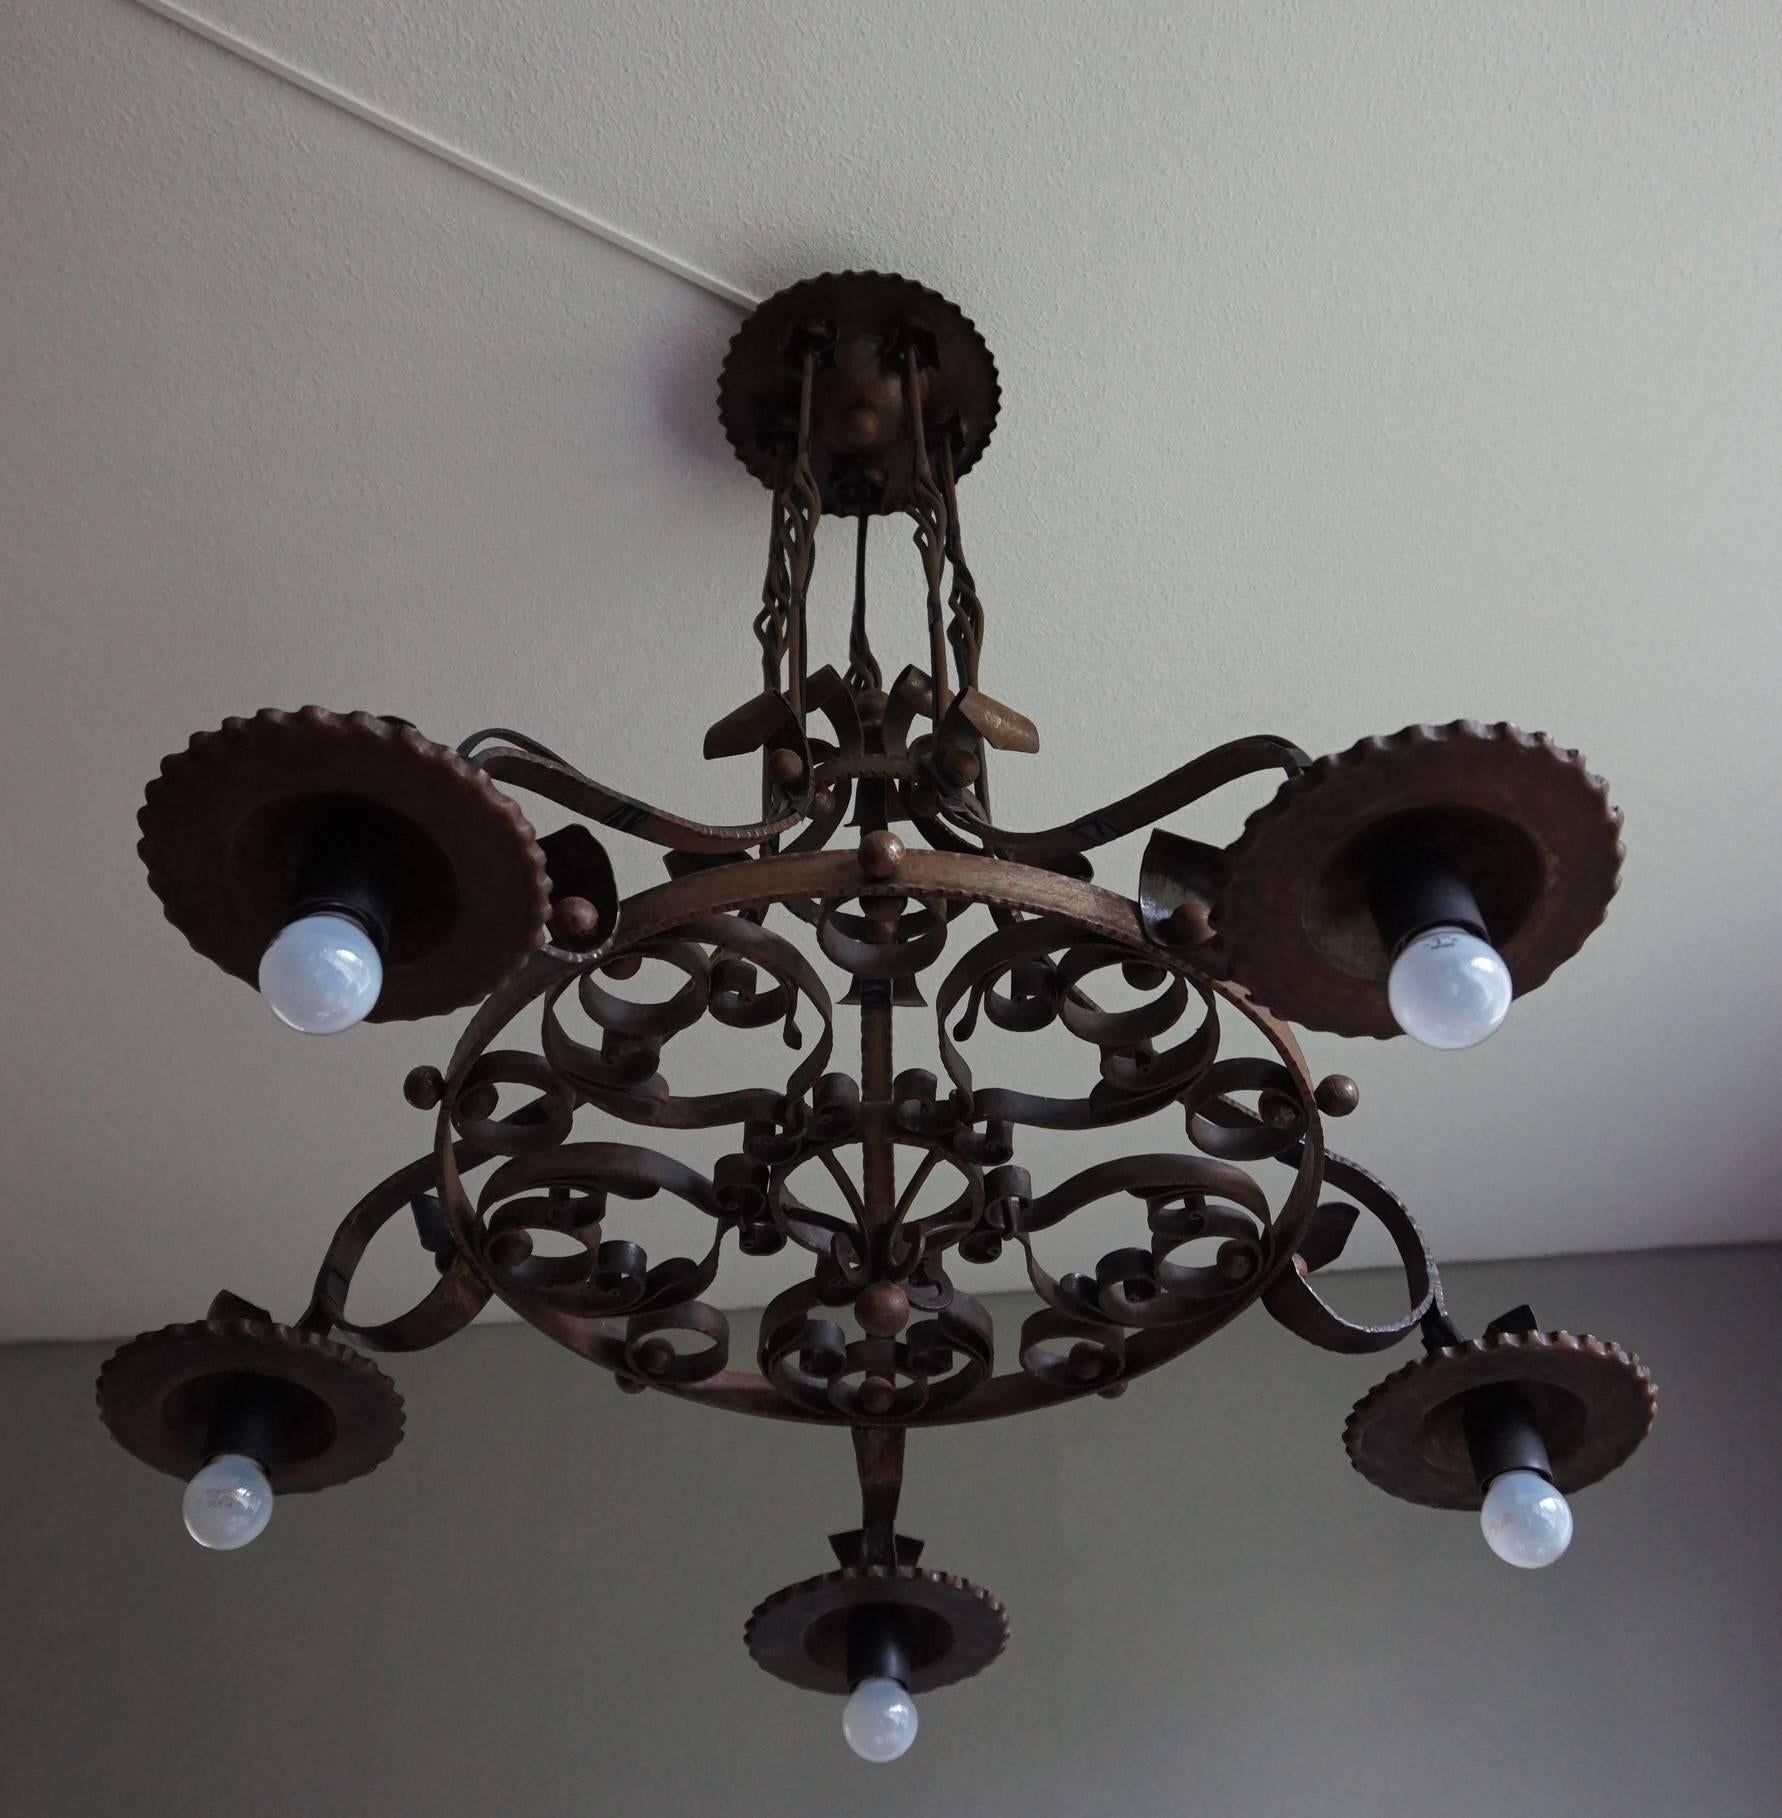 20th Century Good Size & Hand-Forged Arts & Crafts Wrought Iron Light Fixture or Chandelier